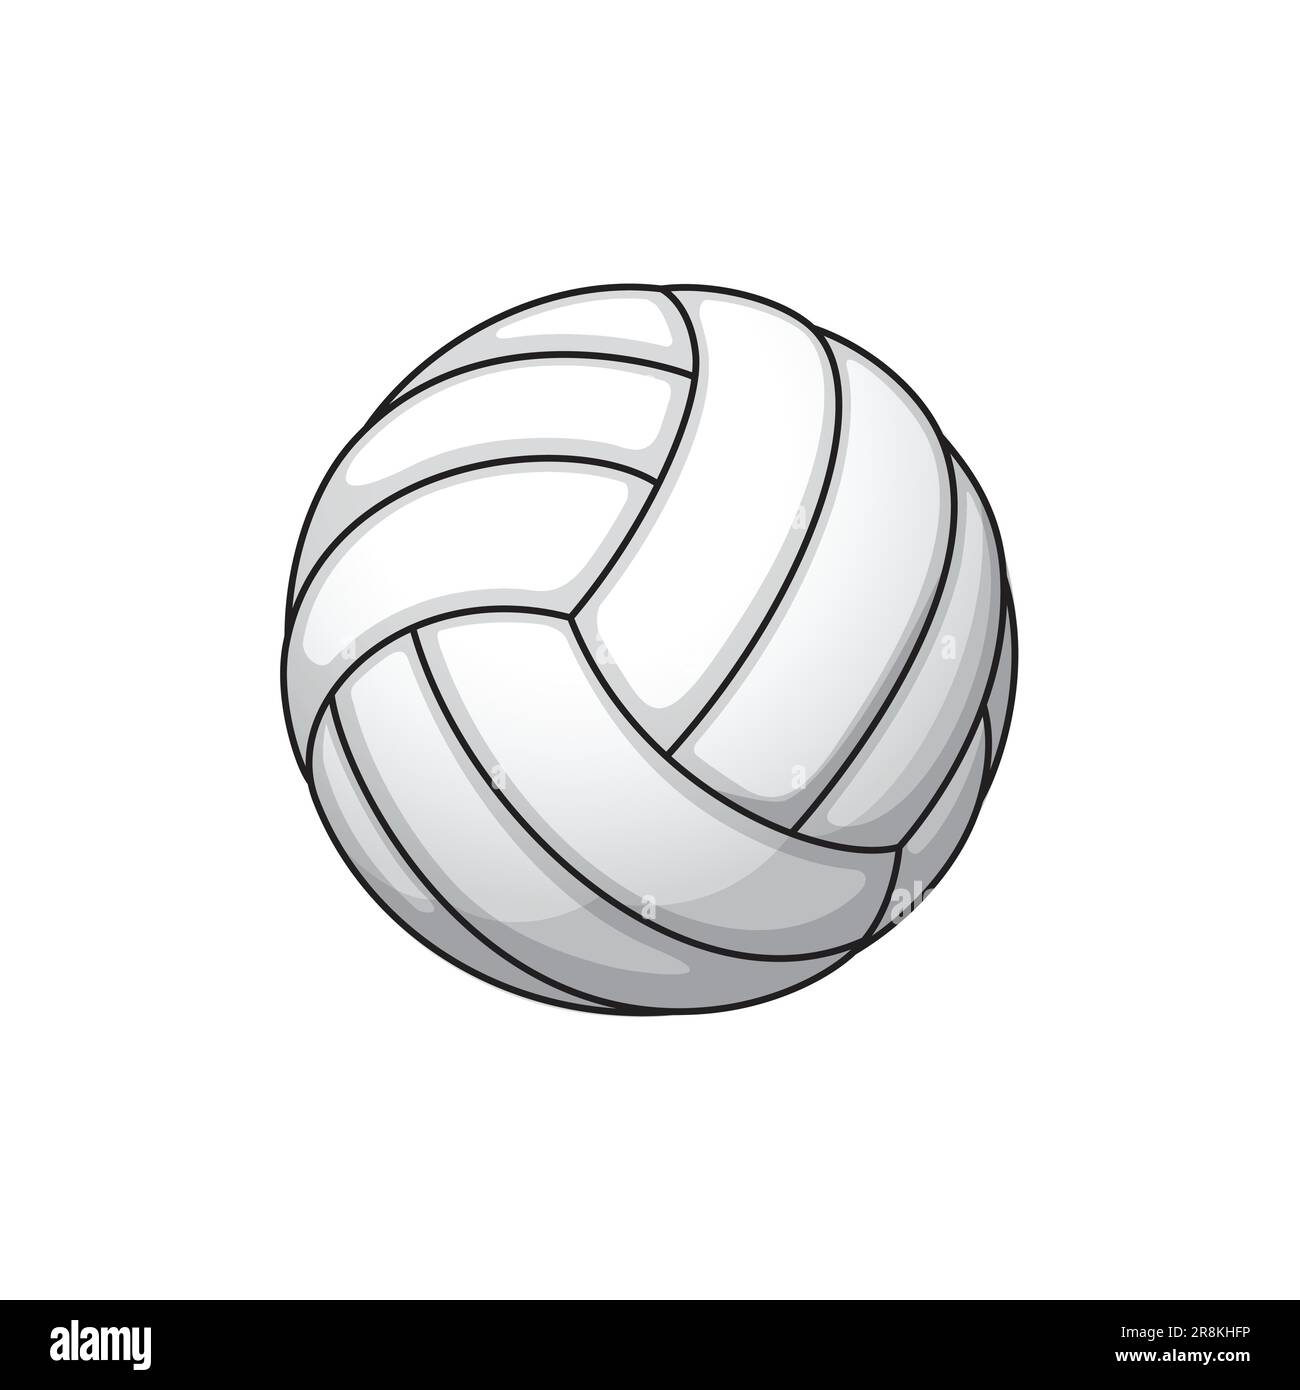 Simple Classic White Volleyball Ball Outline Drawing Symbol Logo Vector Isolated On White Background 2R8KHFP 